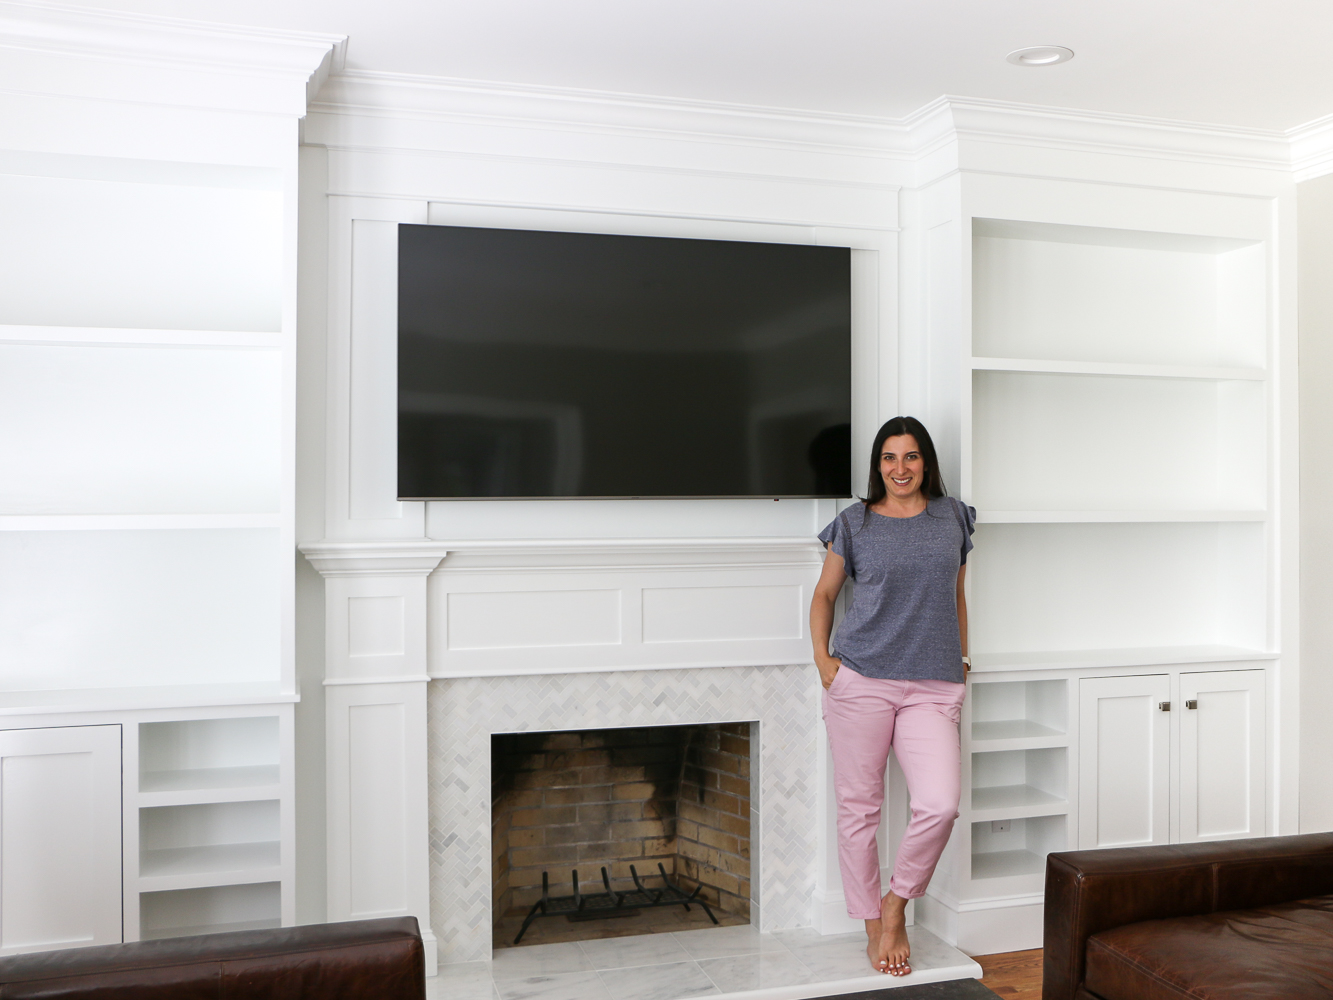 Stefana Silber in front of white marble fireplace and builtin shelves